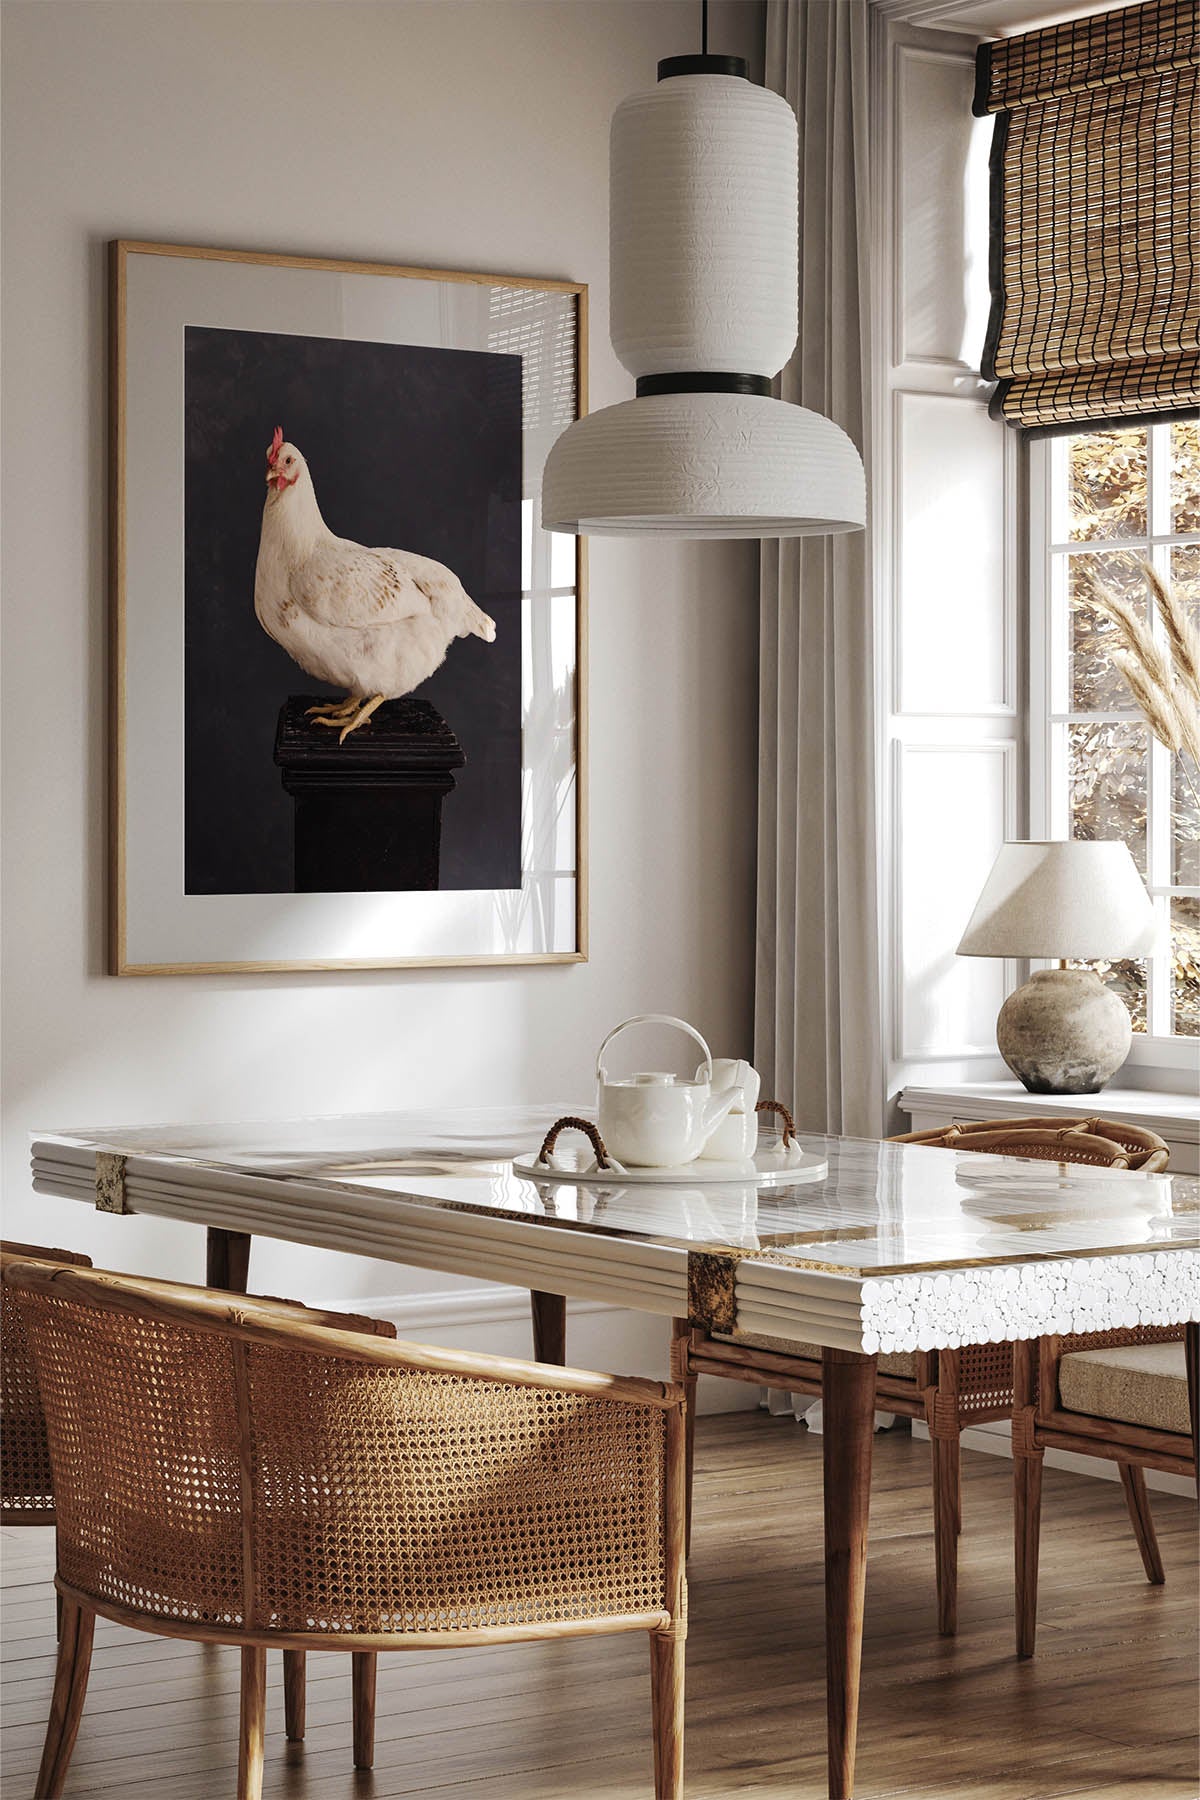 Fine Art Print Of A White Chicken Standing On A Black Plinth With A Black Background Framed On A Wall In An European Style Dining Room Near A WIndow.